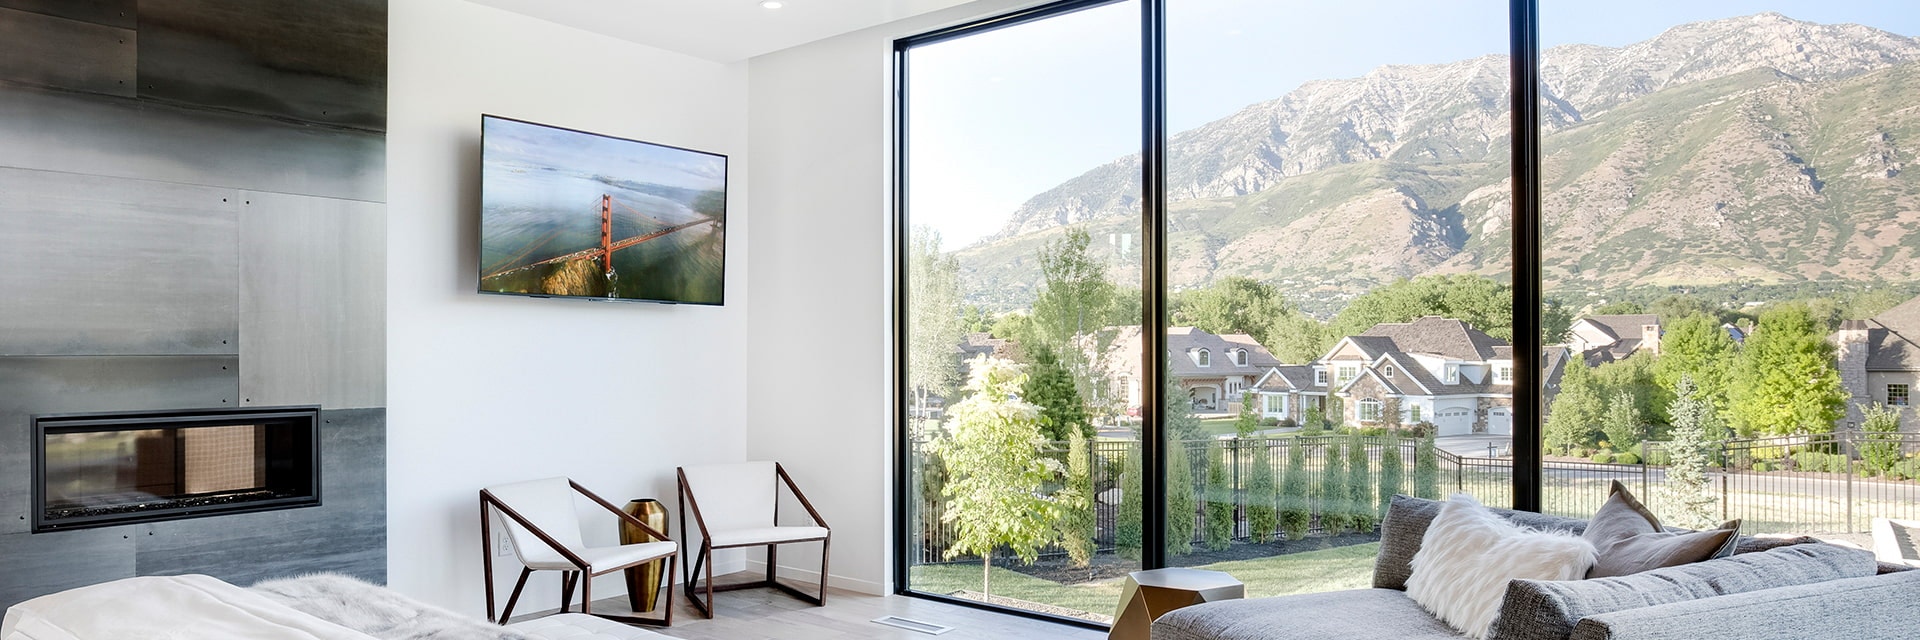 floor-to-ceiling windows on a contemporary living room wall bring the mountain view into the home.